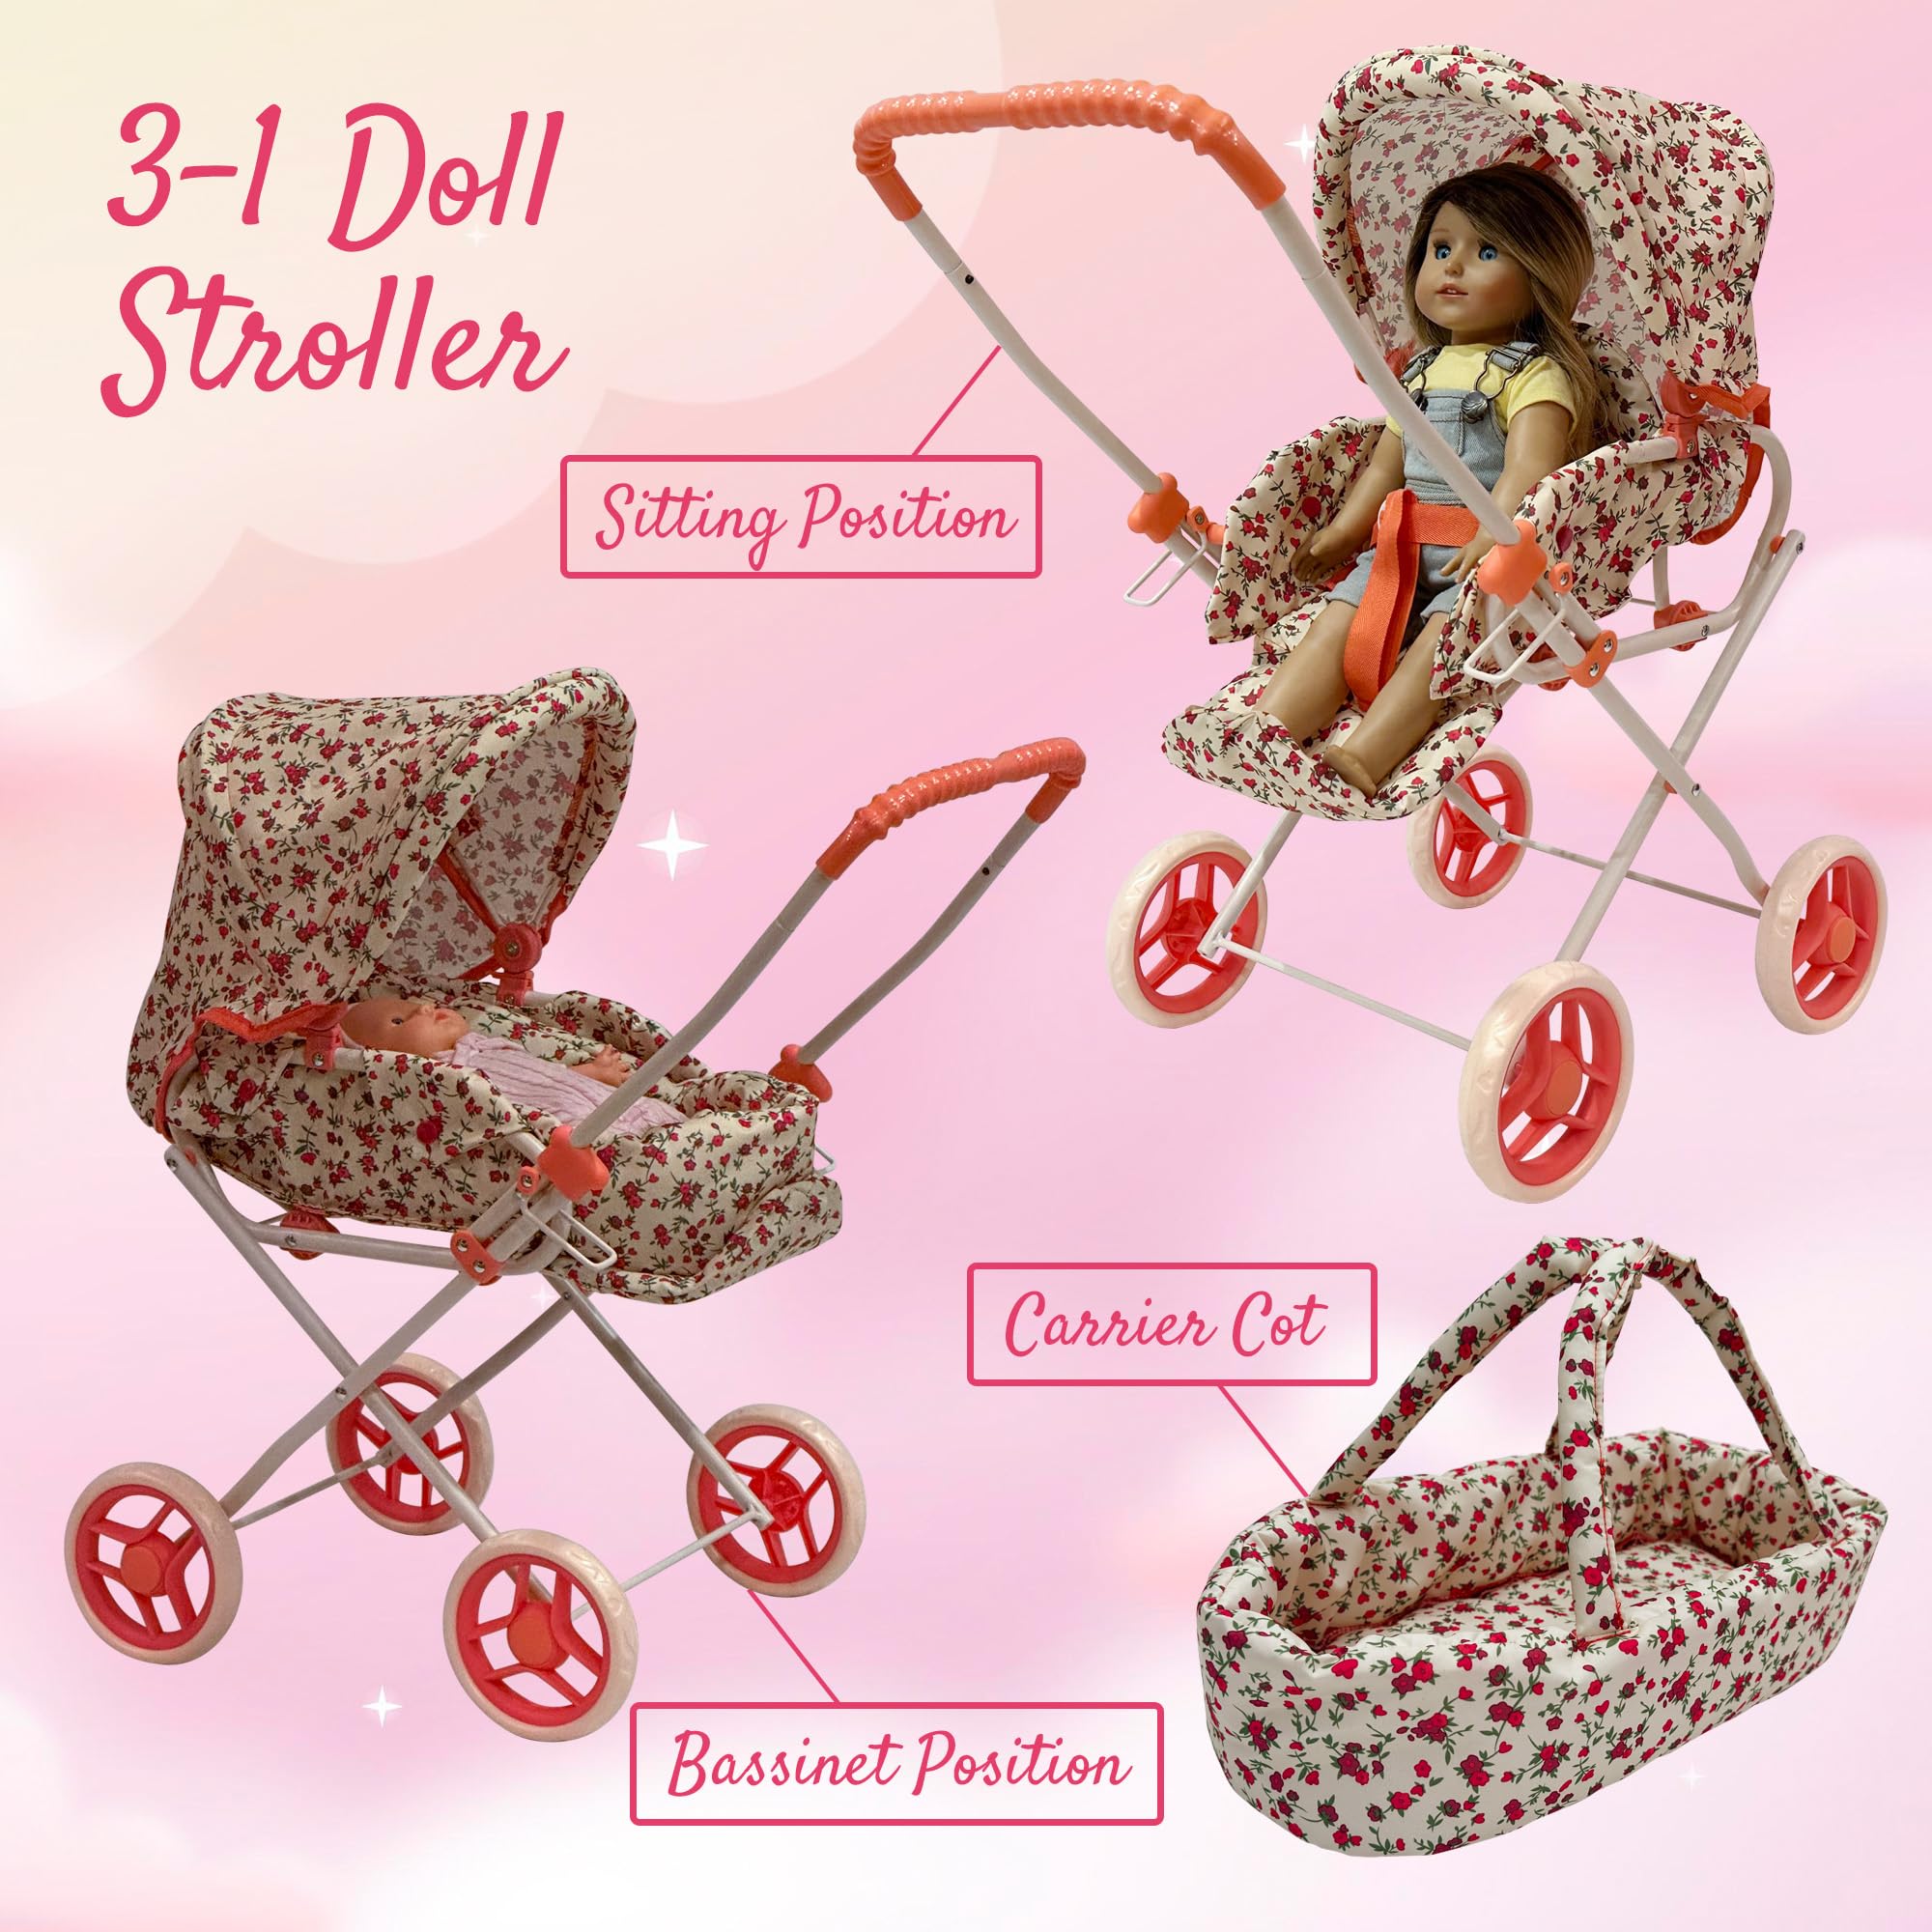 Baby Doll Stroller Play Set, 3-in-1 Babydoll Stroller with Removable Bassinet Baby Carriage for Dolls Toy Doll Stroller for Toddlers 3-4 Years, (Floral)